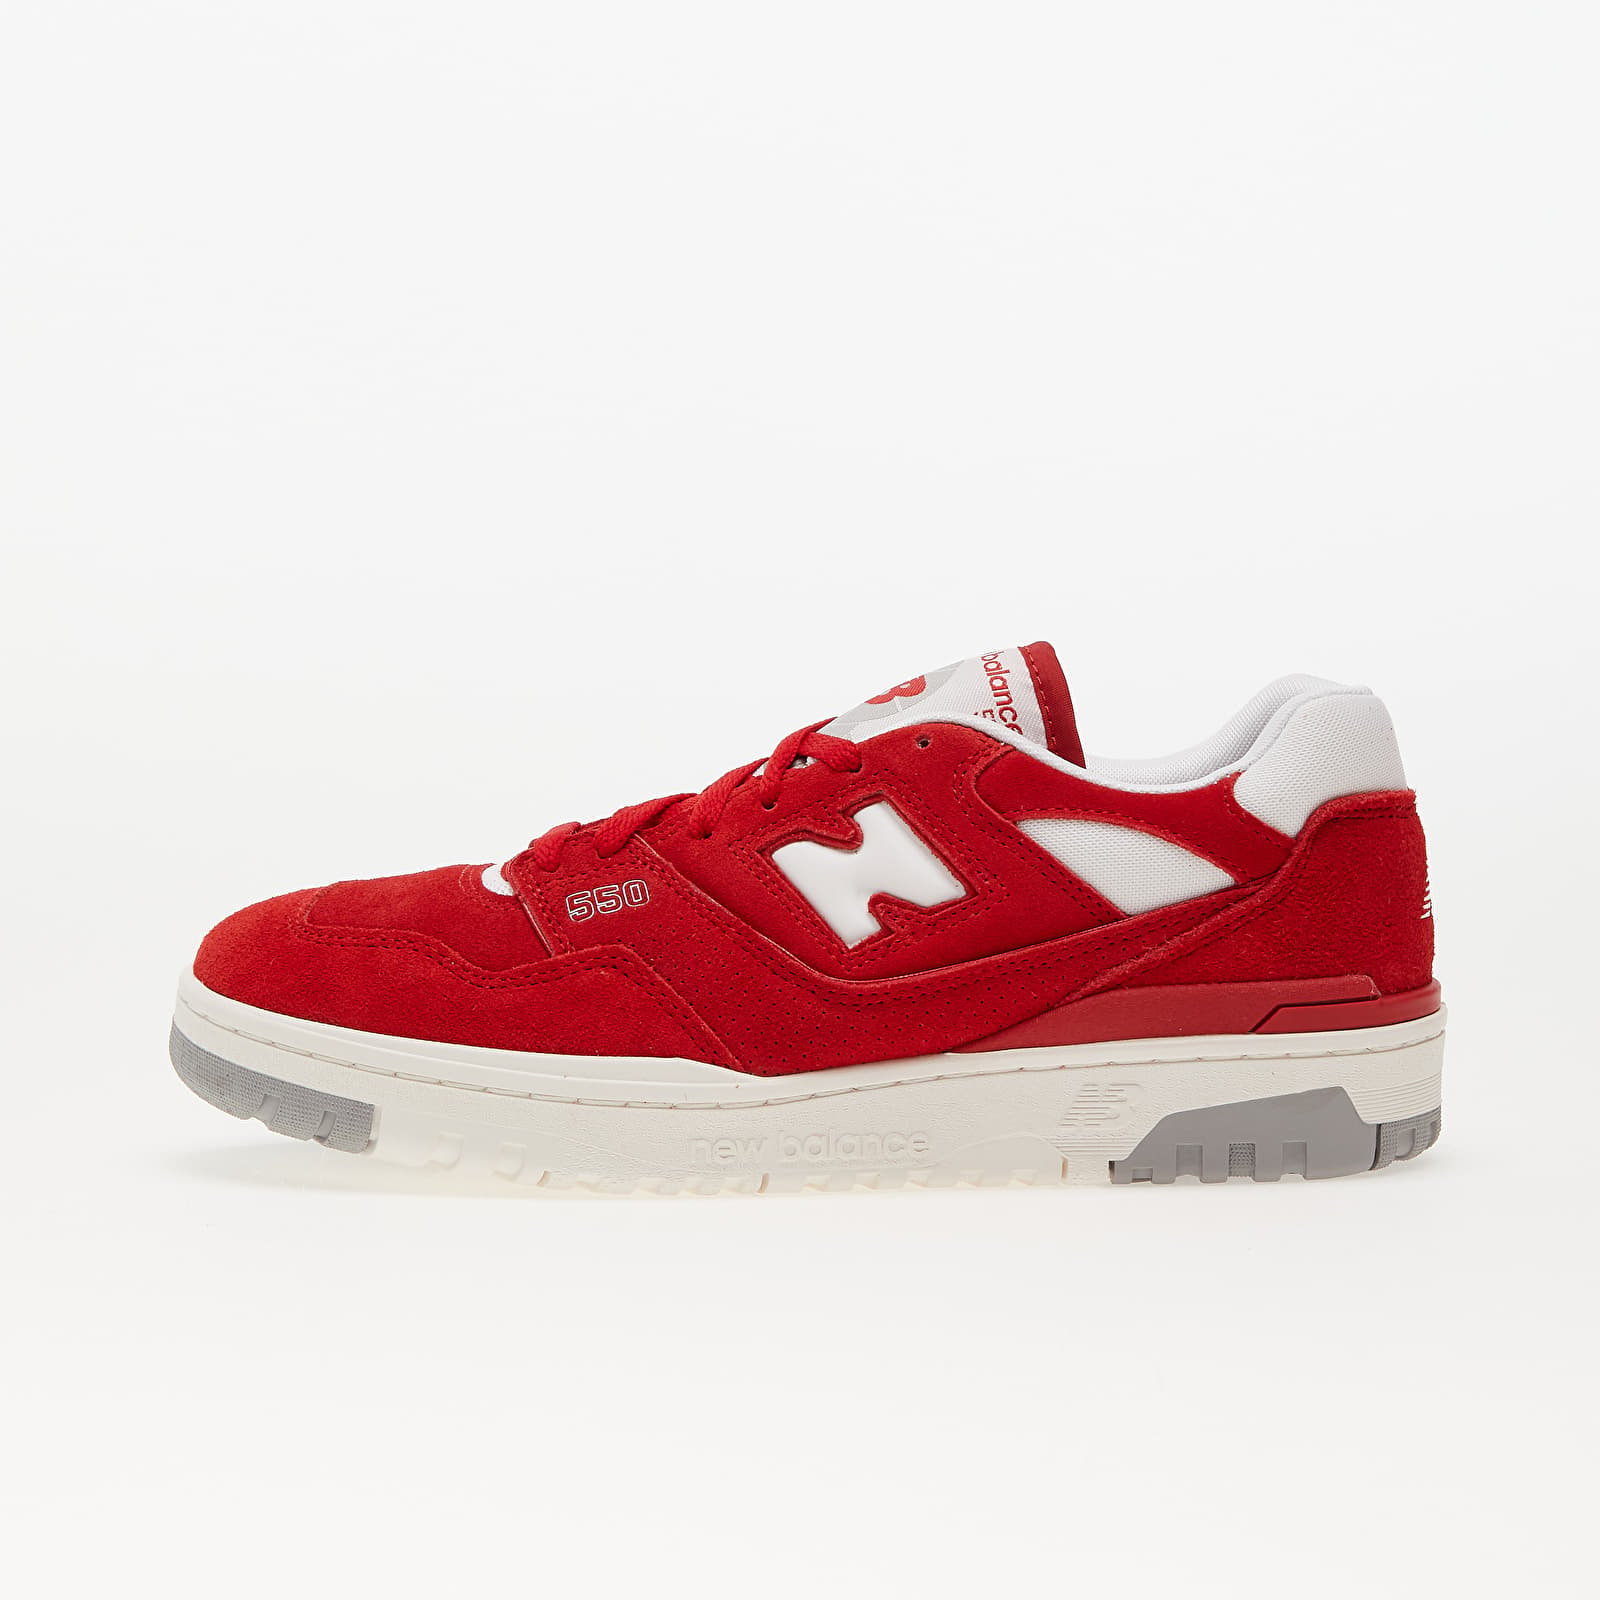 Chaussures et baskets homme New Balance 550 Team Red